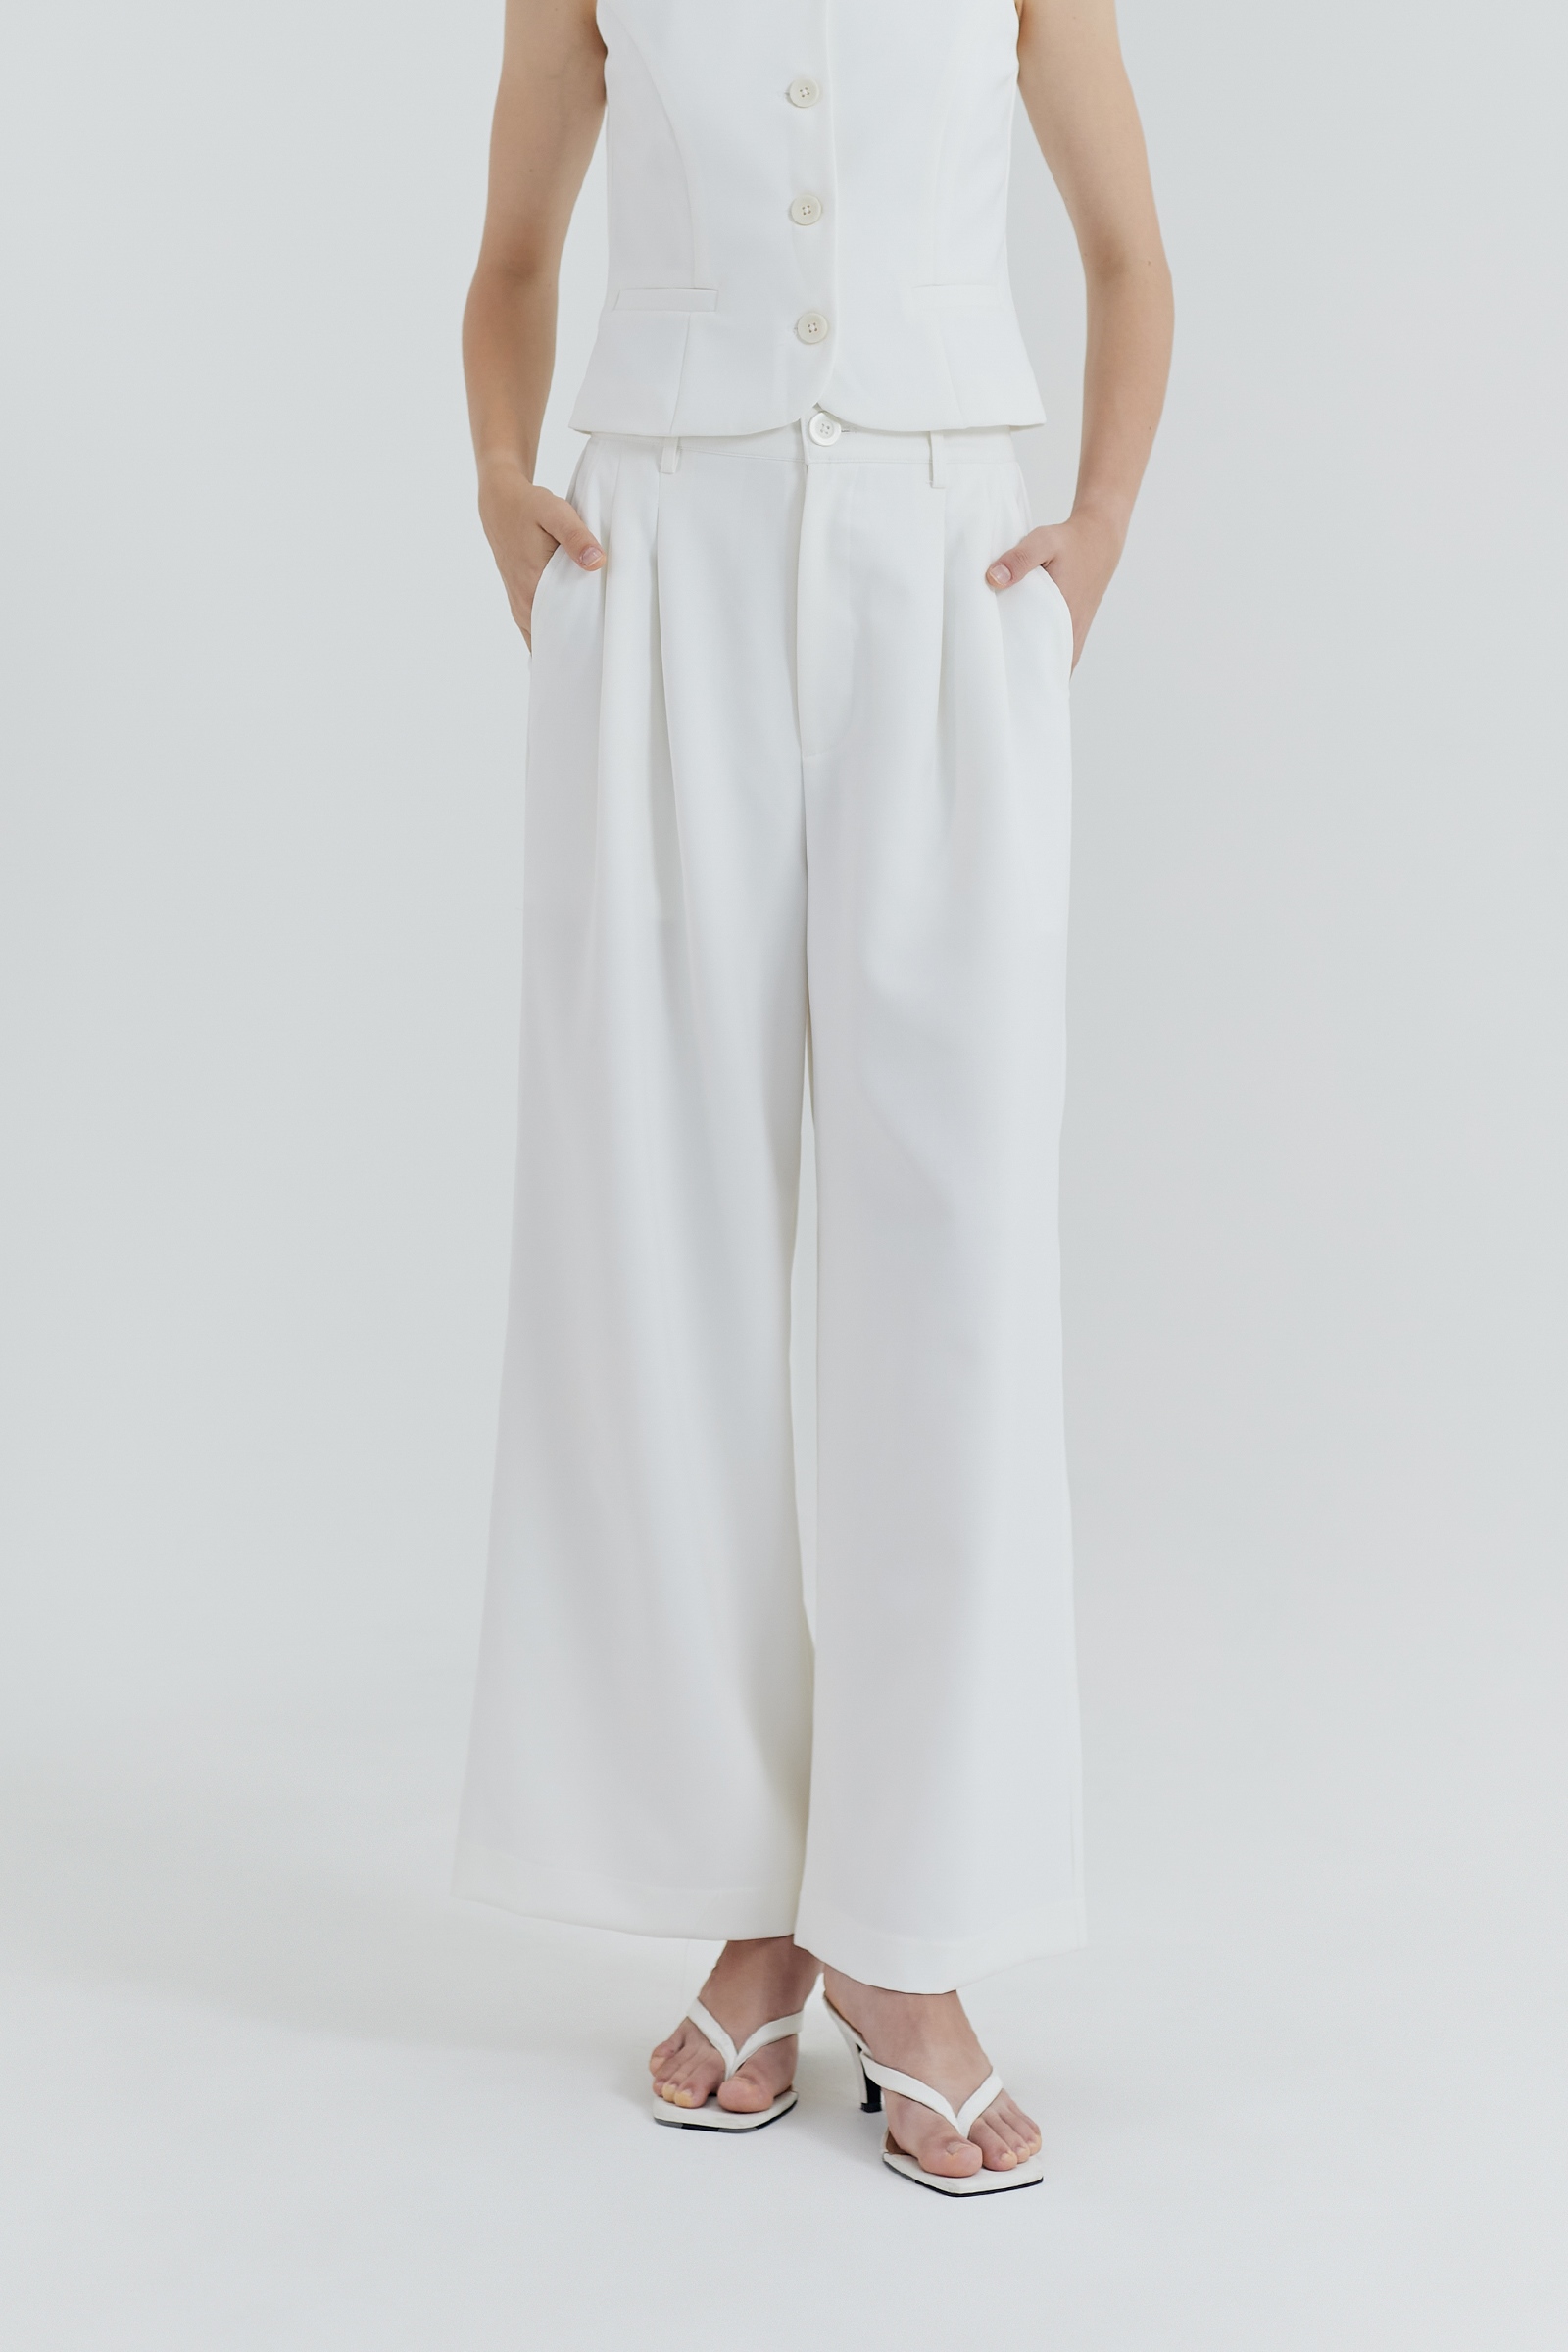 Picture of Kivee x Cath Halim - Joan Classic Trousers Ivory